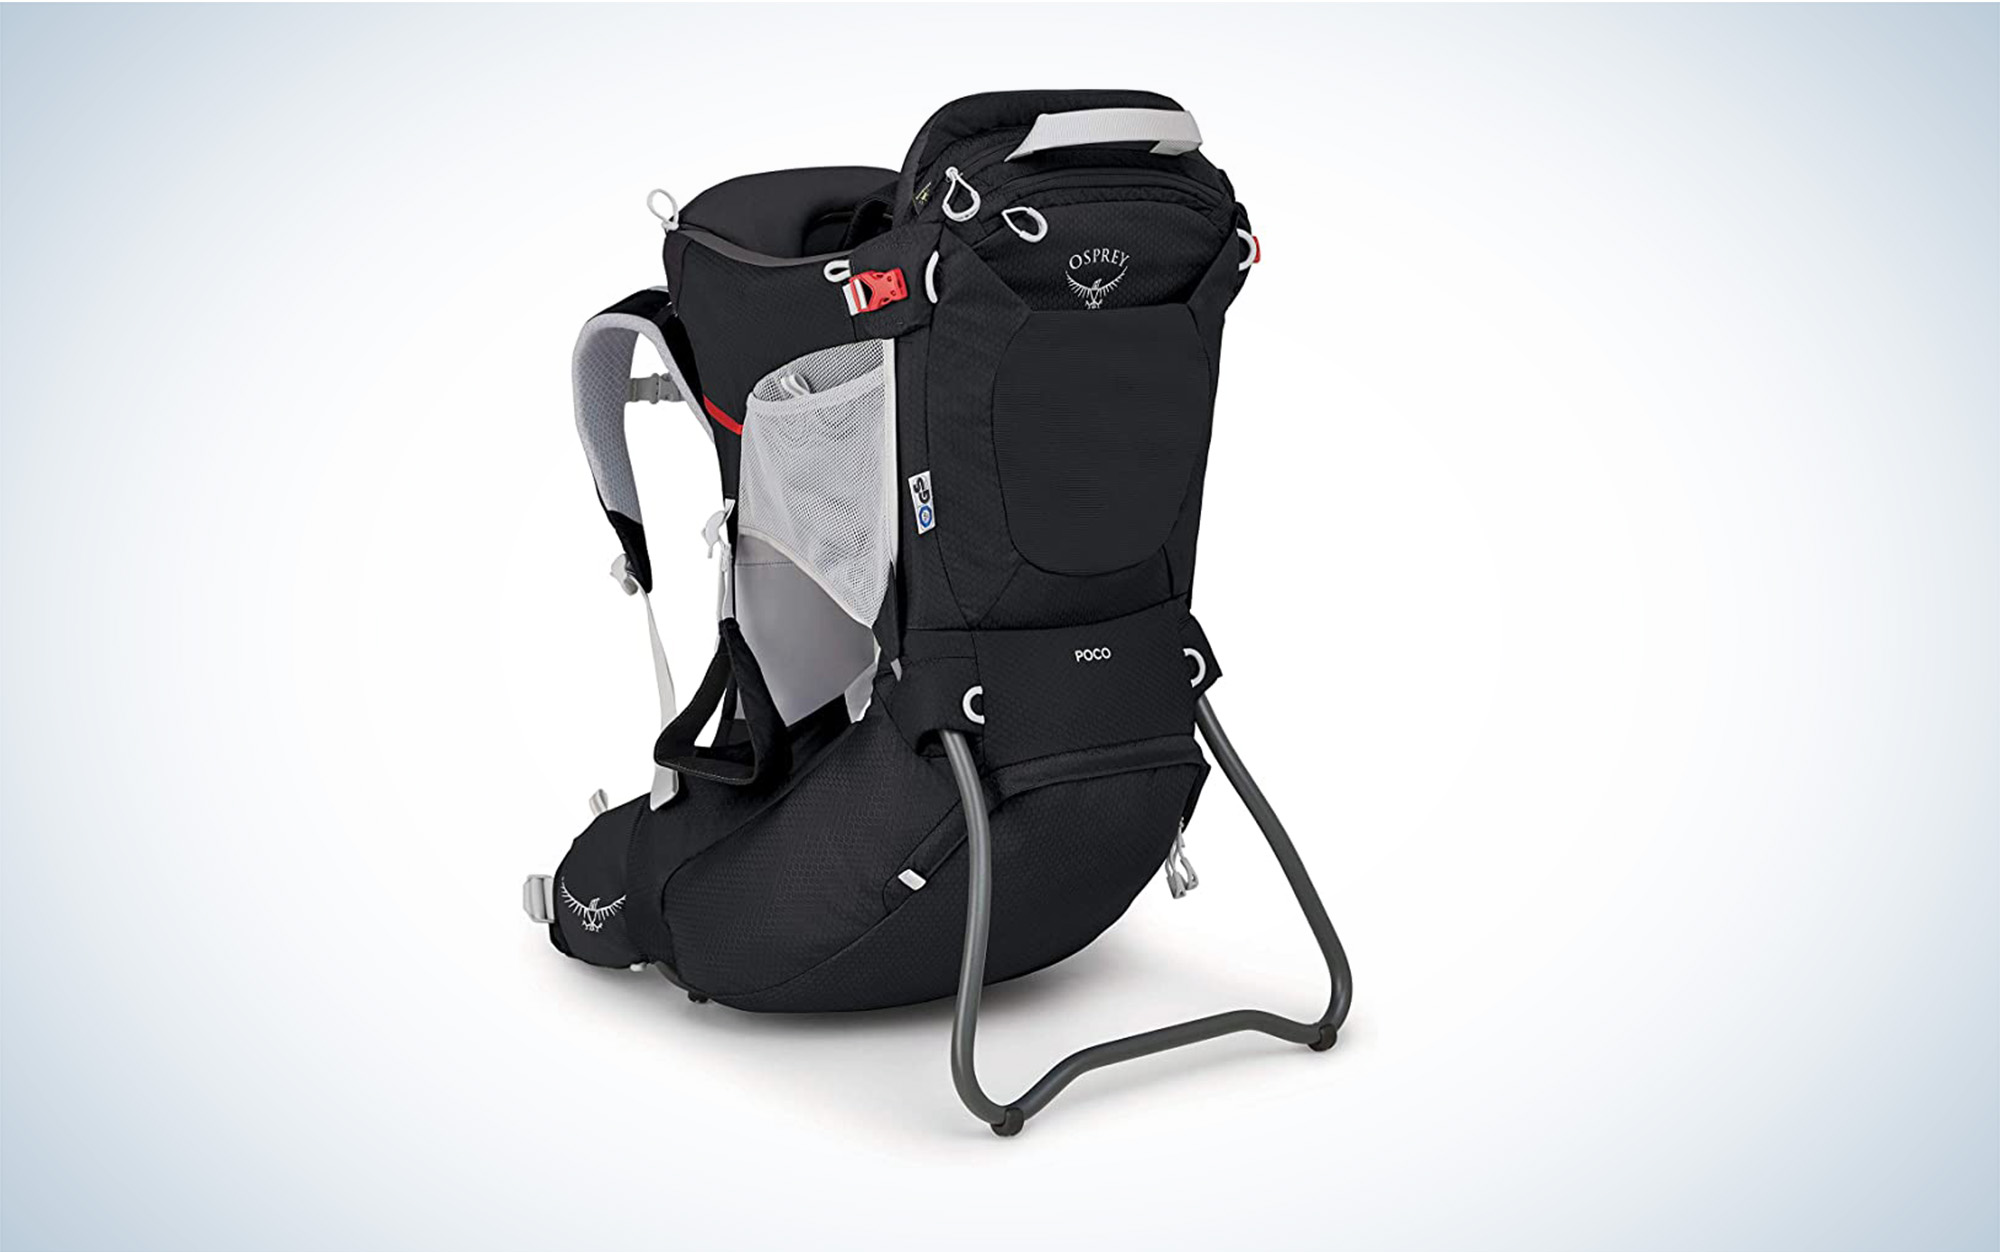 The Osprey Poco is the best kid carrier for backpacking